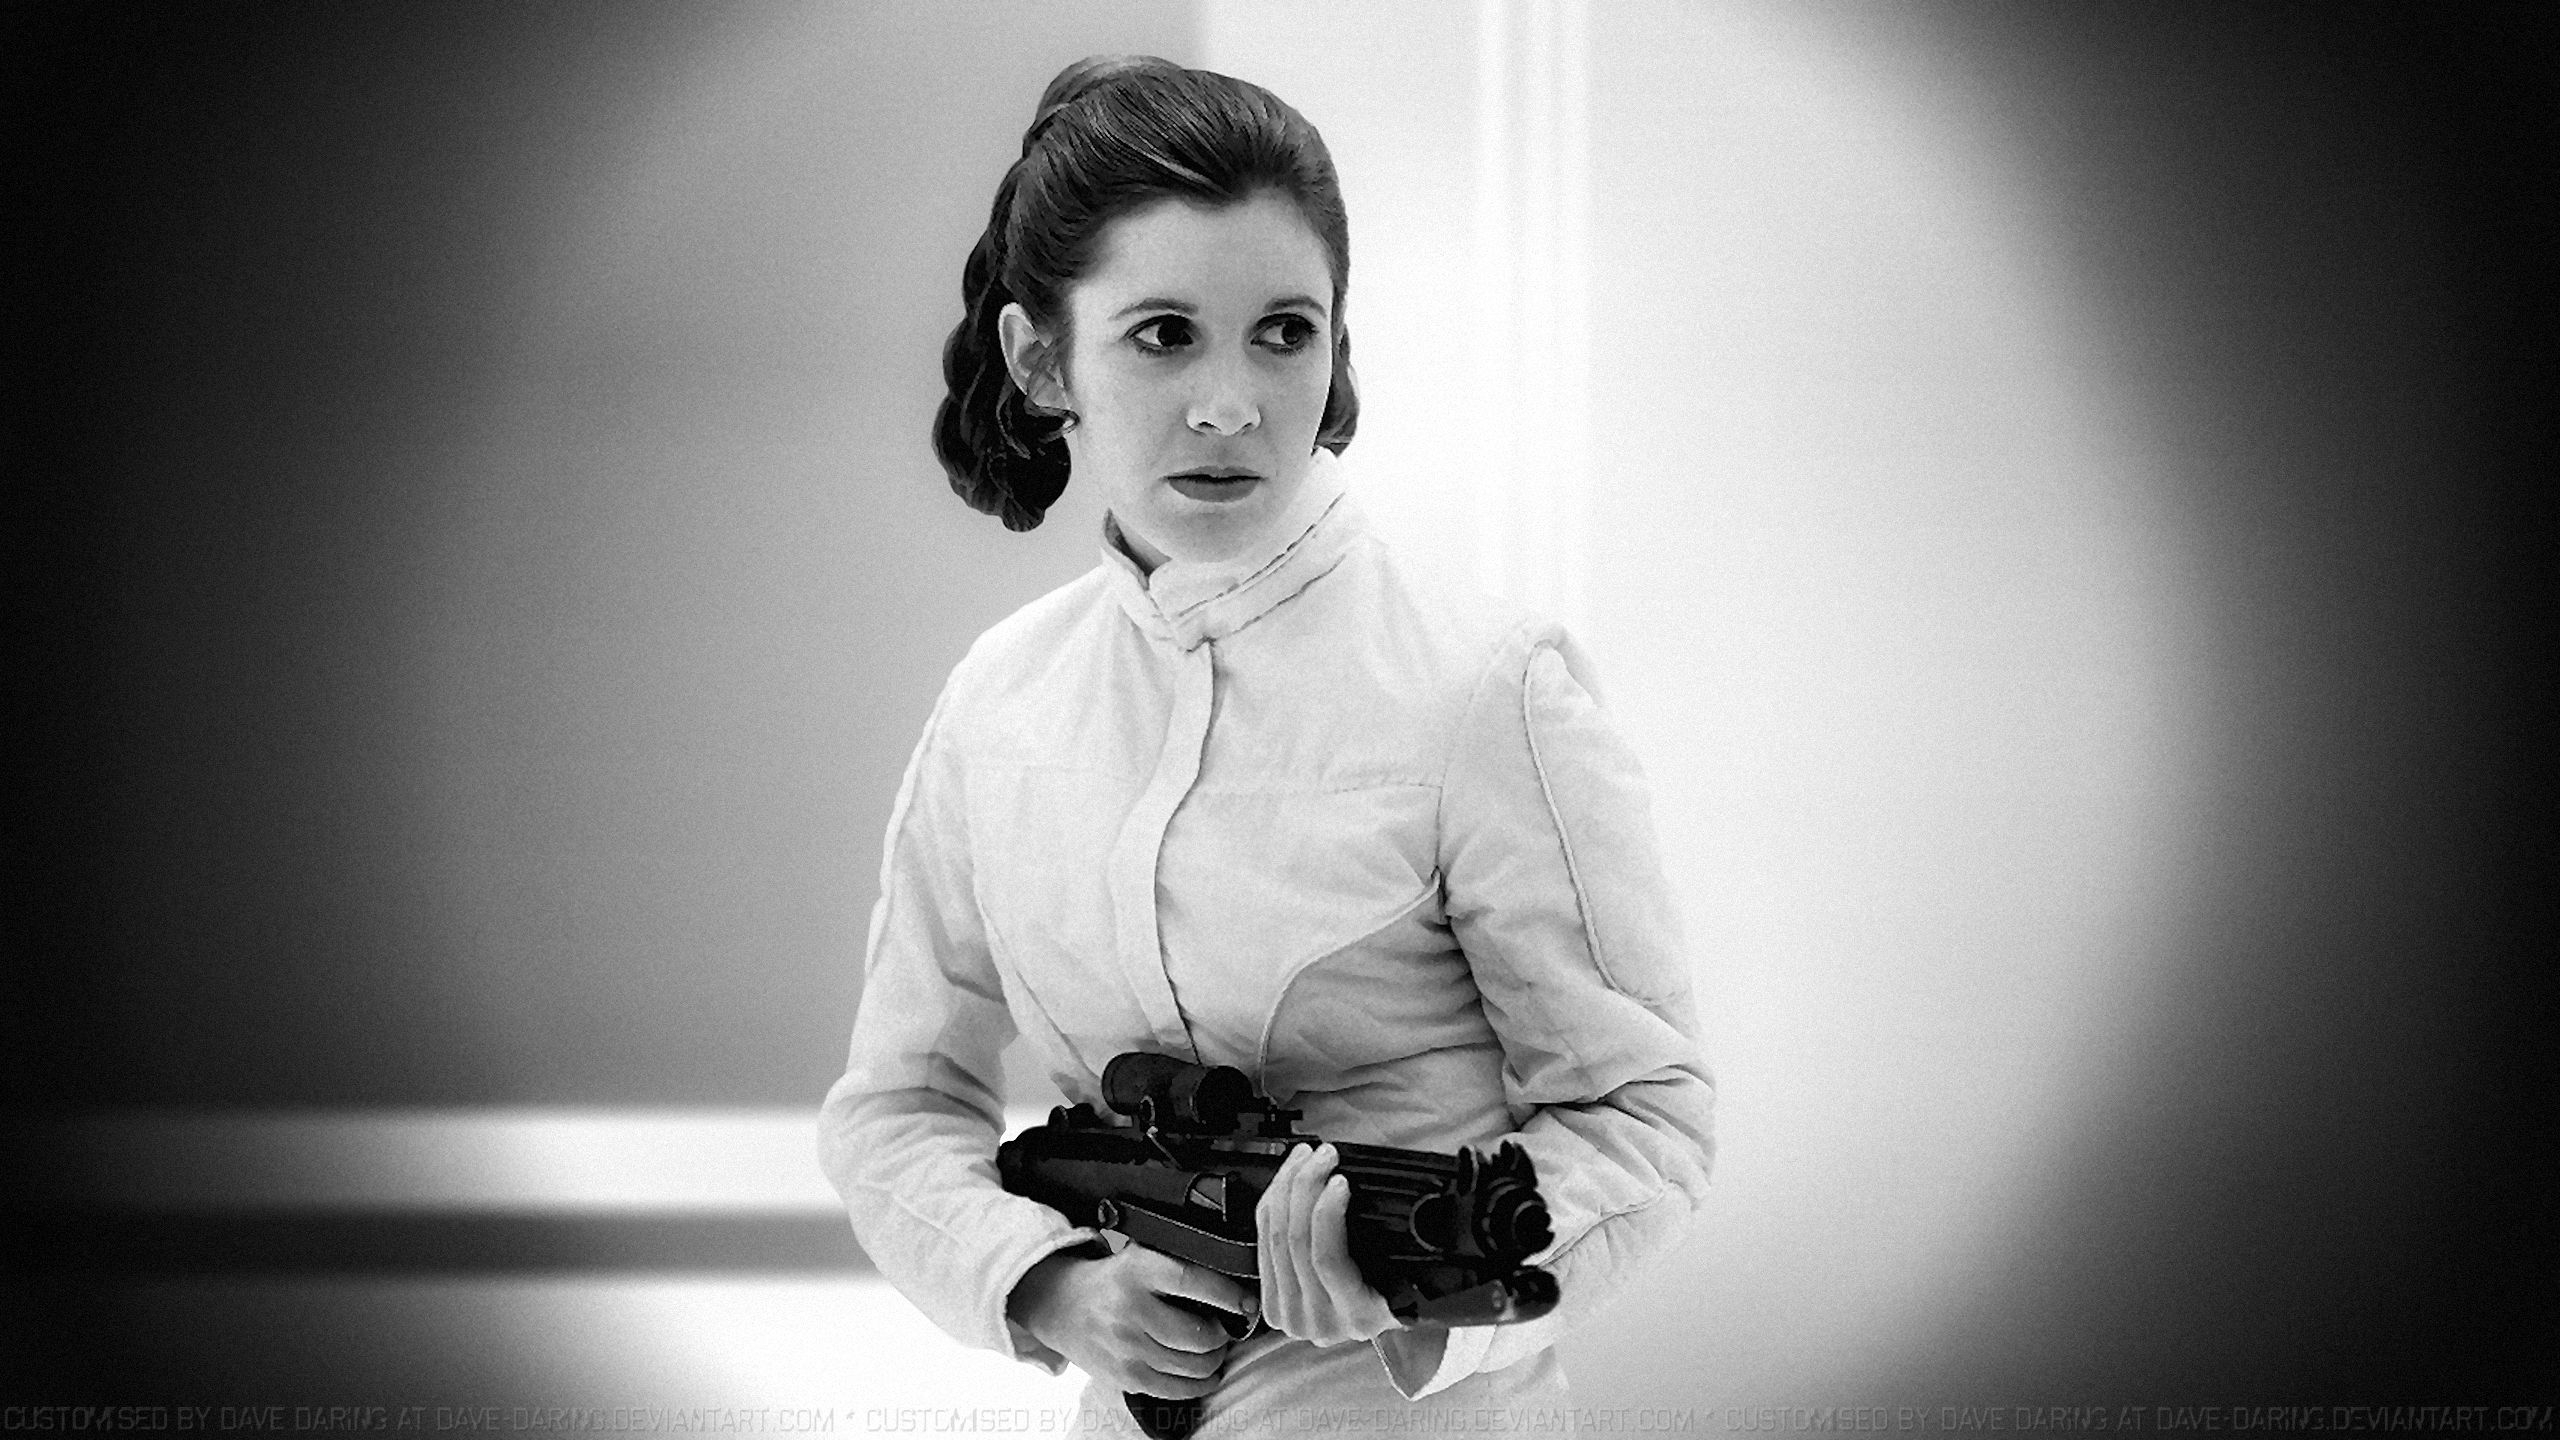 2560x1440 Carrie Fisher Princess Leia XLIV by Dave-Daring on deviantART | Carrie fisher princess leia, Carrie fisher, Princess leia